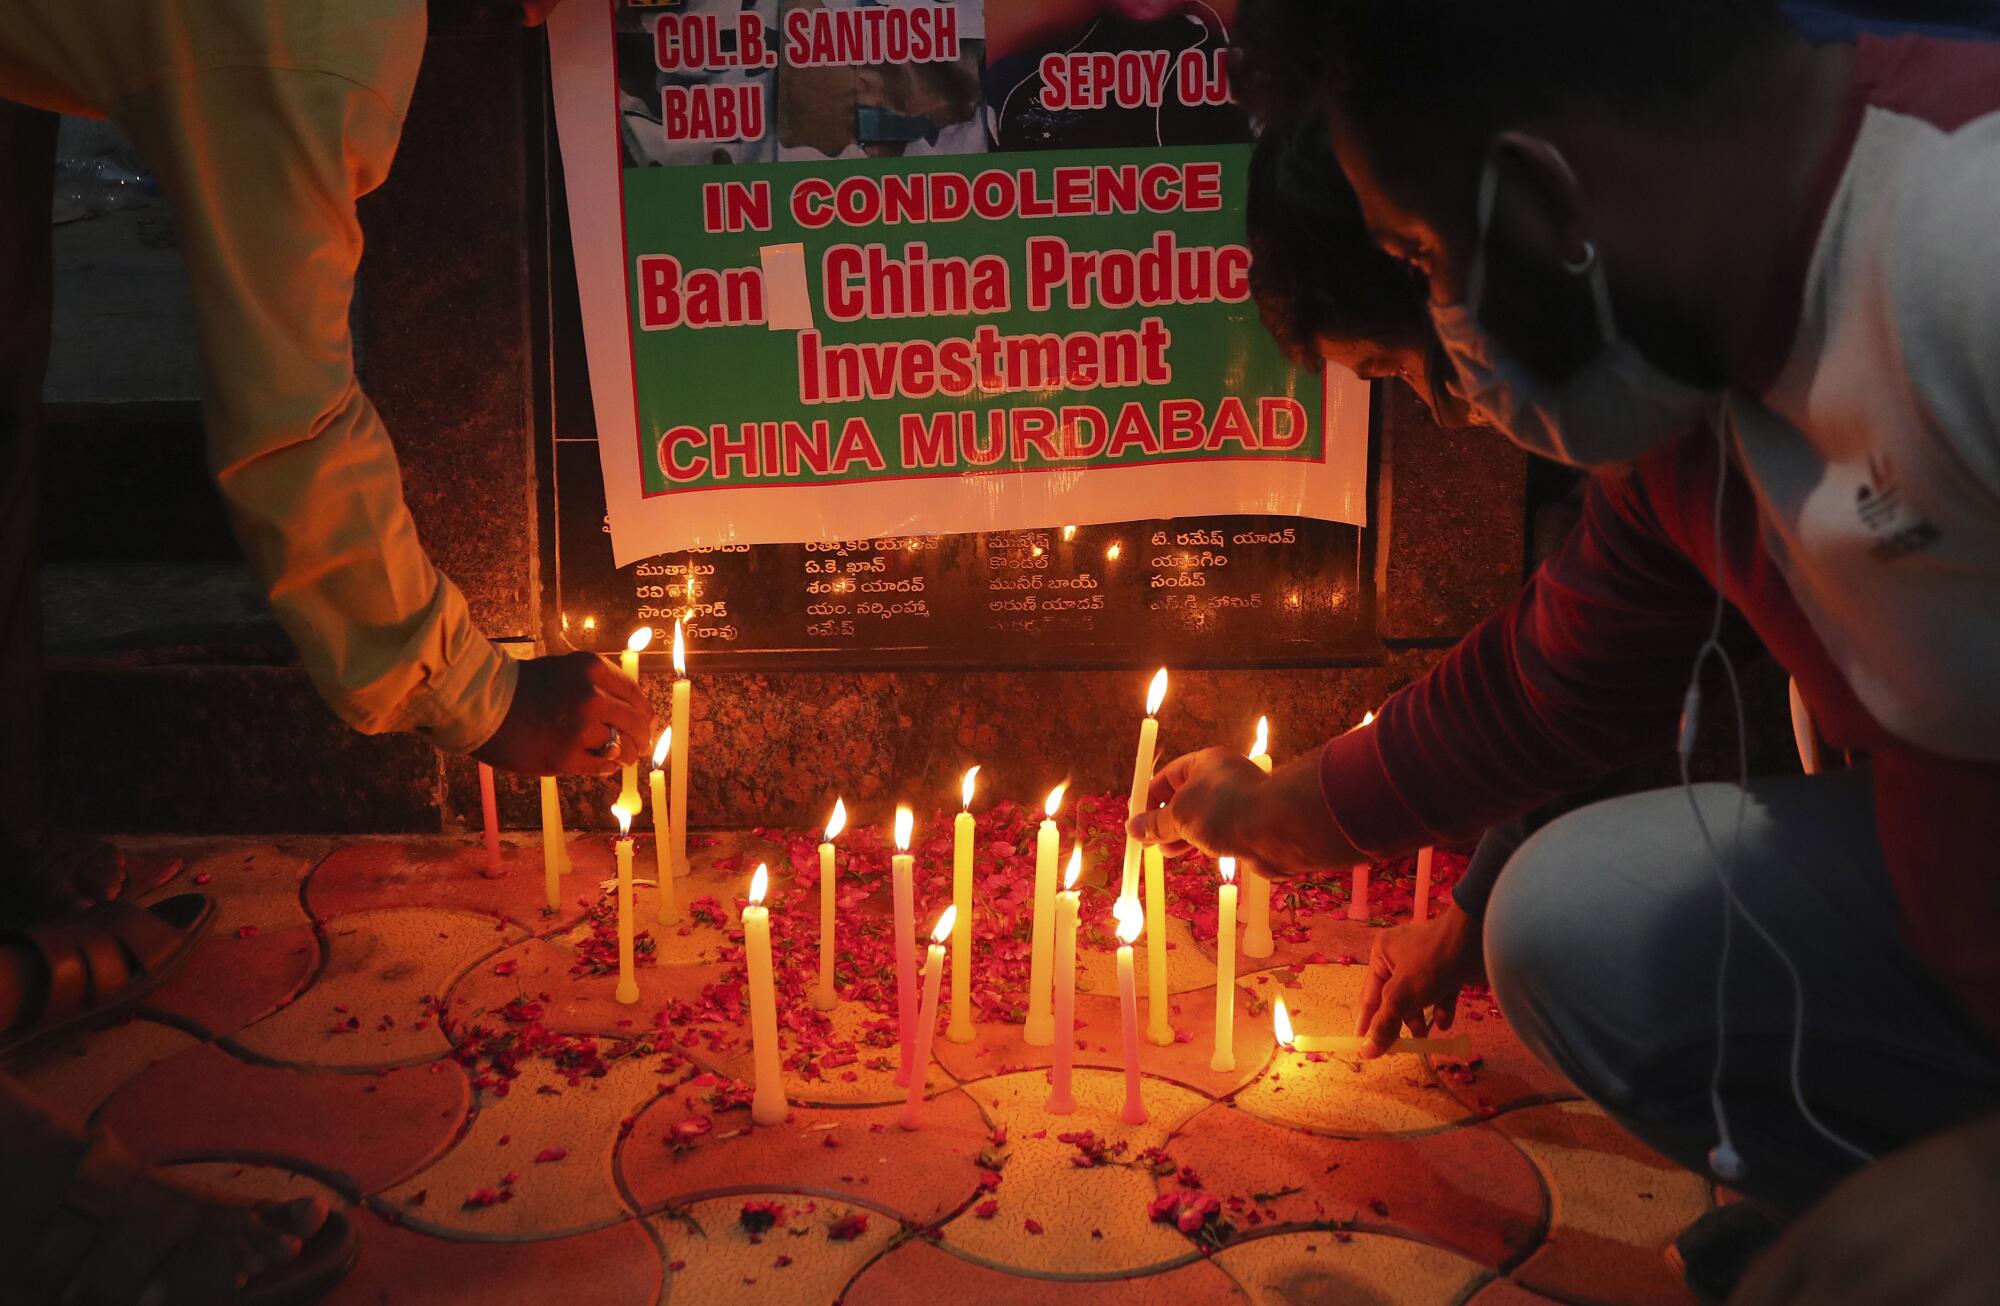 People light candles near a poster that calls for a ban on China products and investment